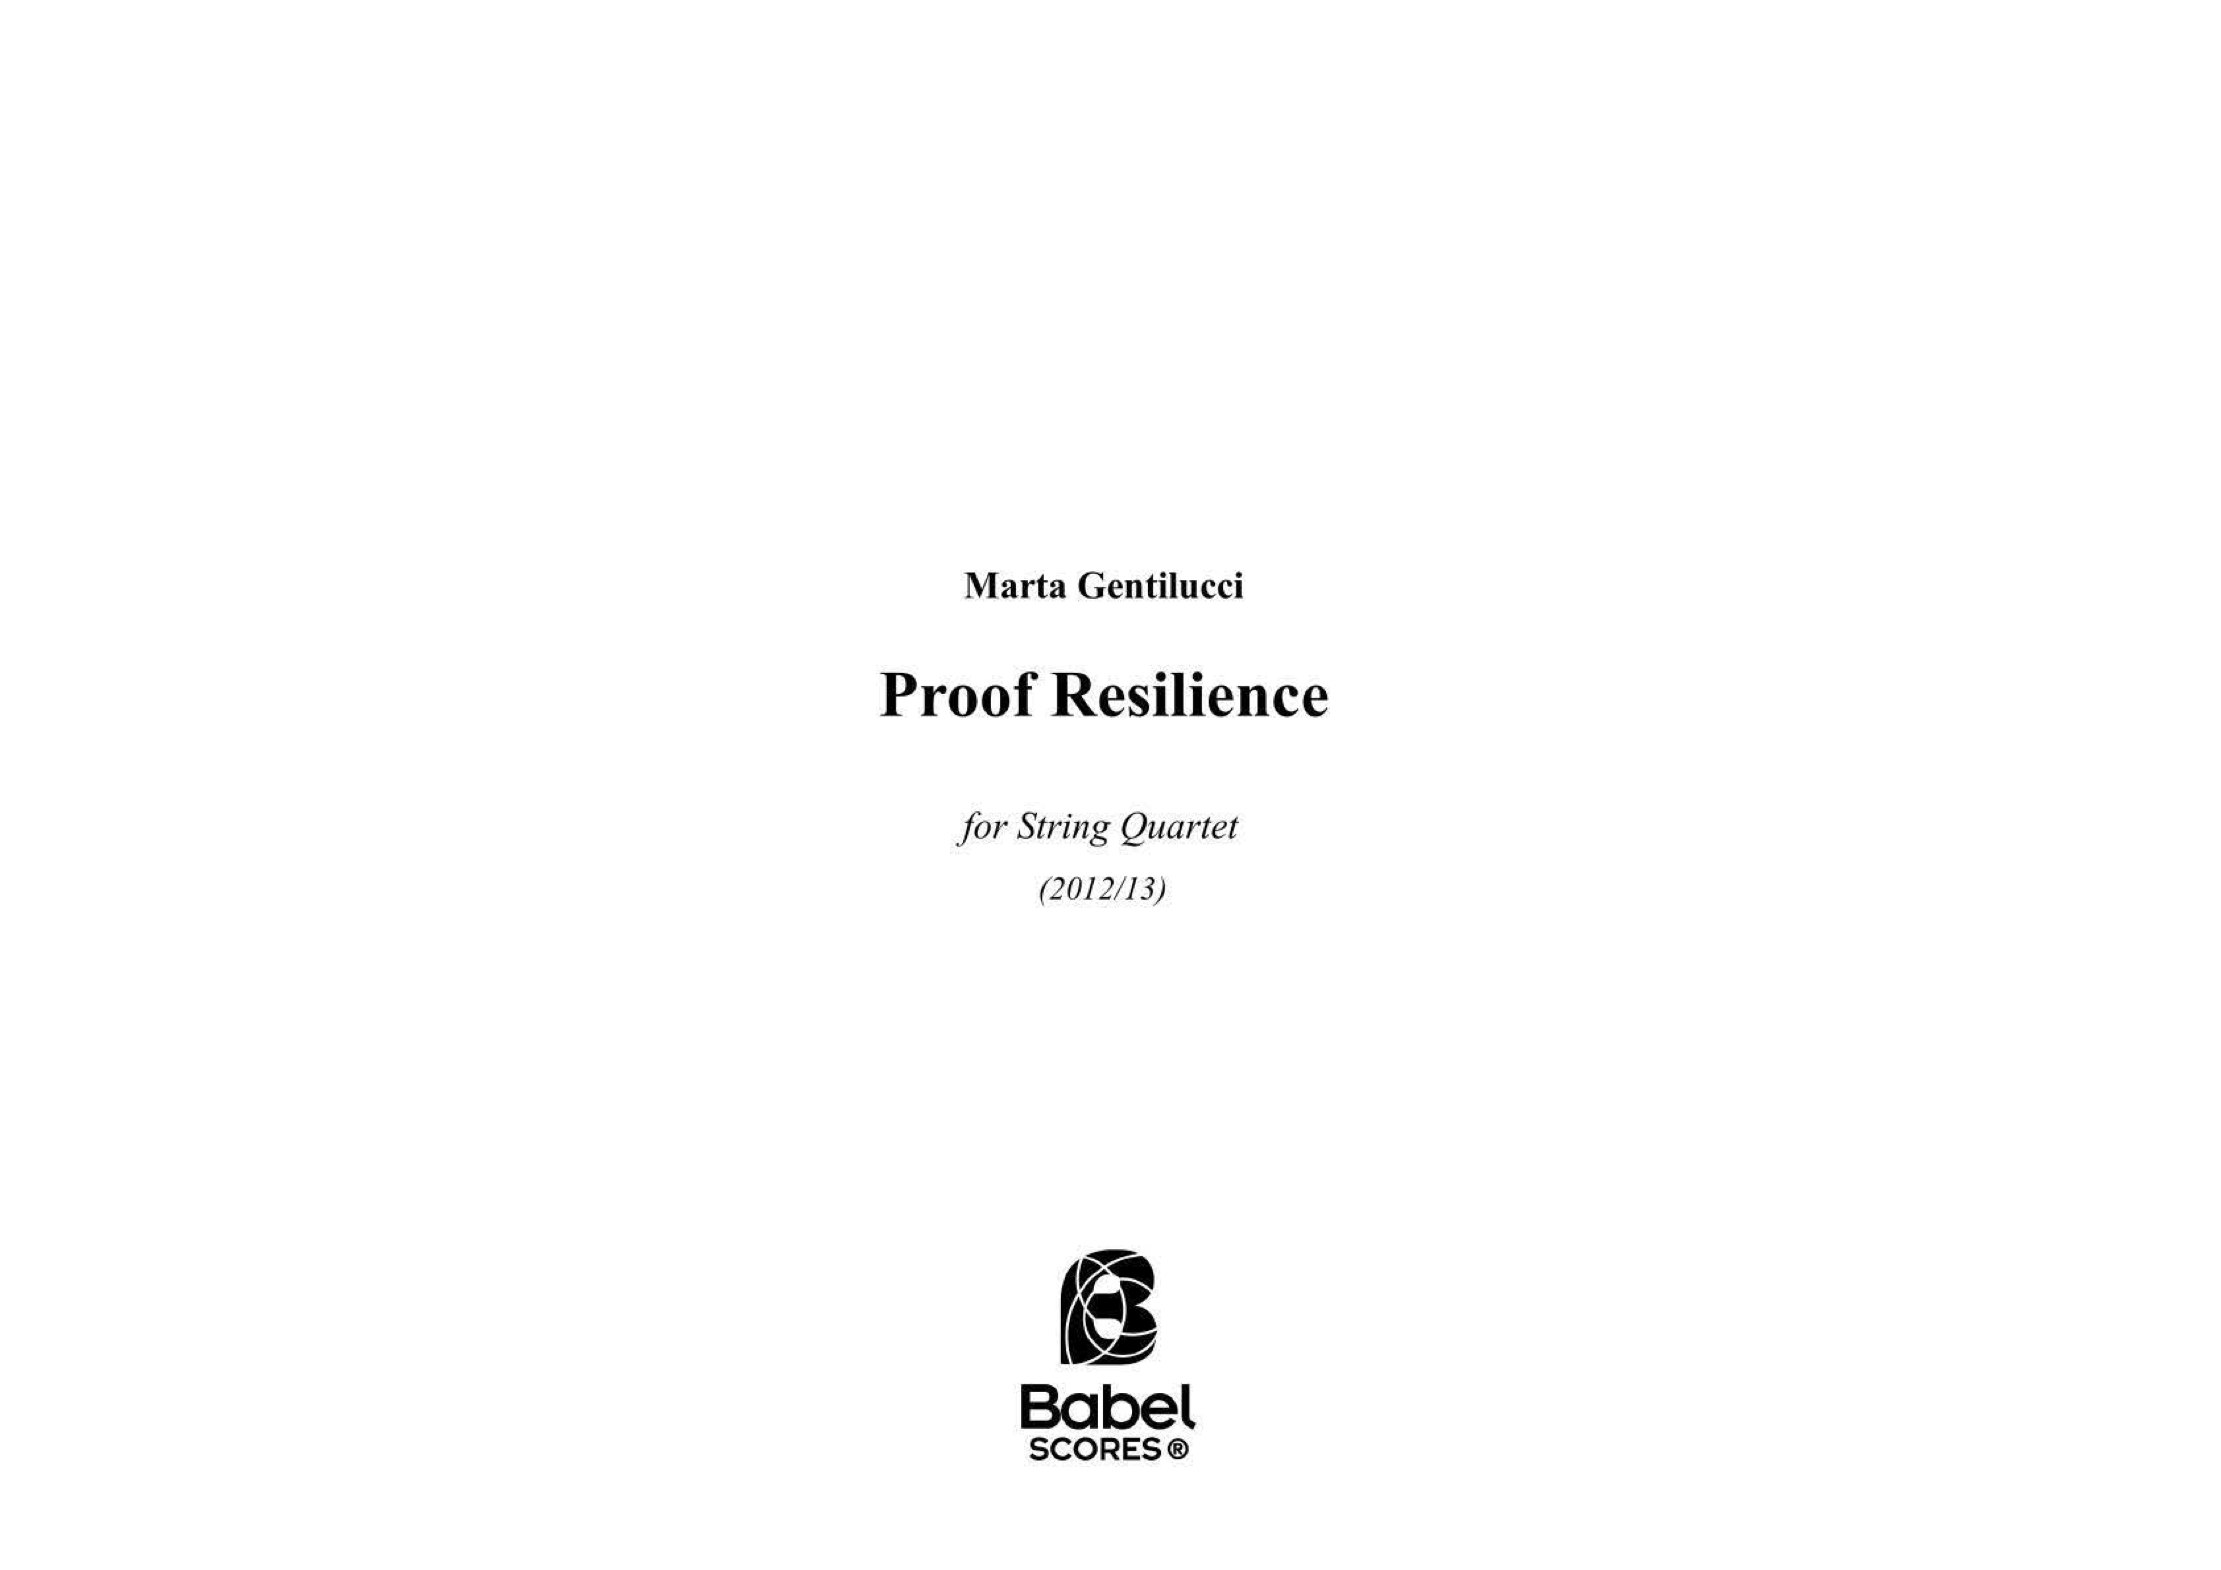 ProofResilience A4 z